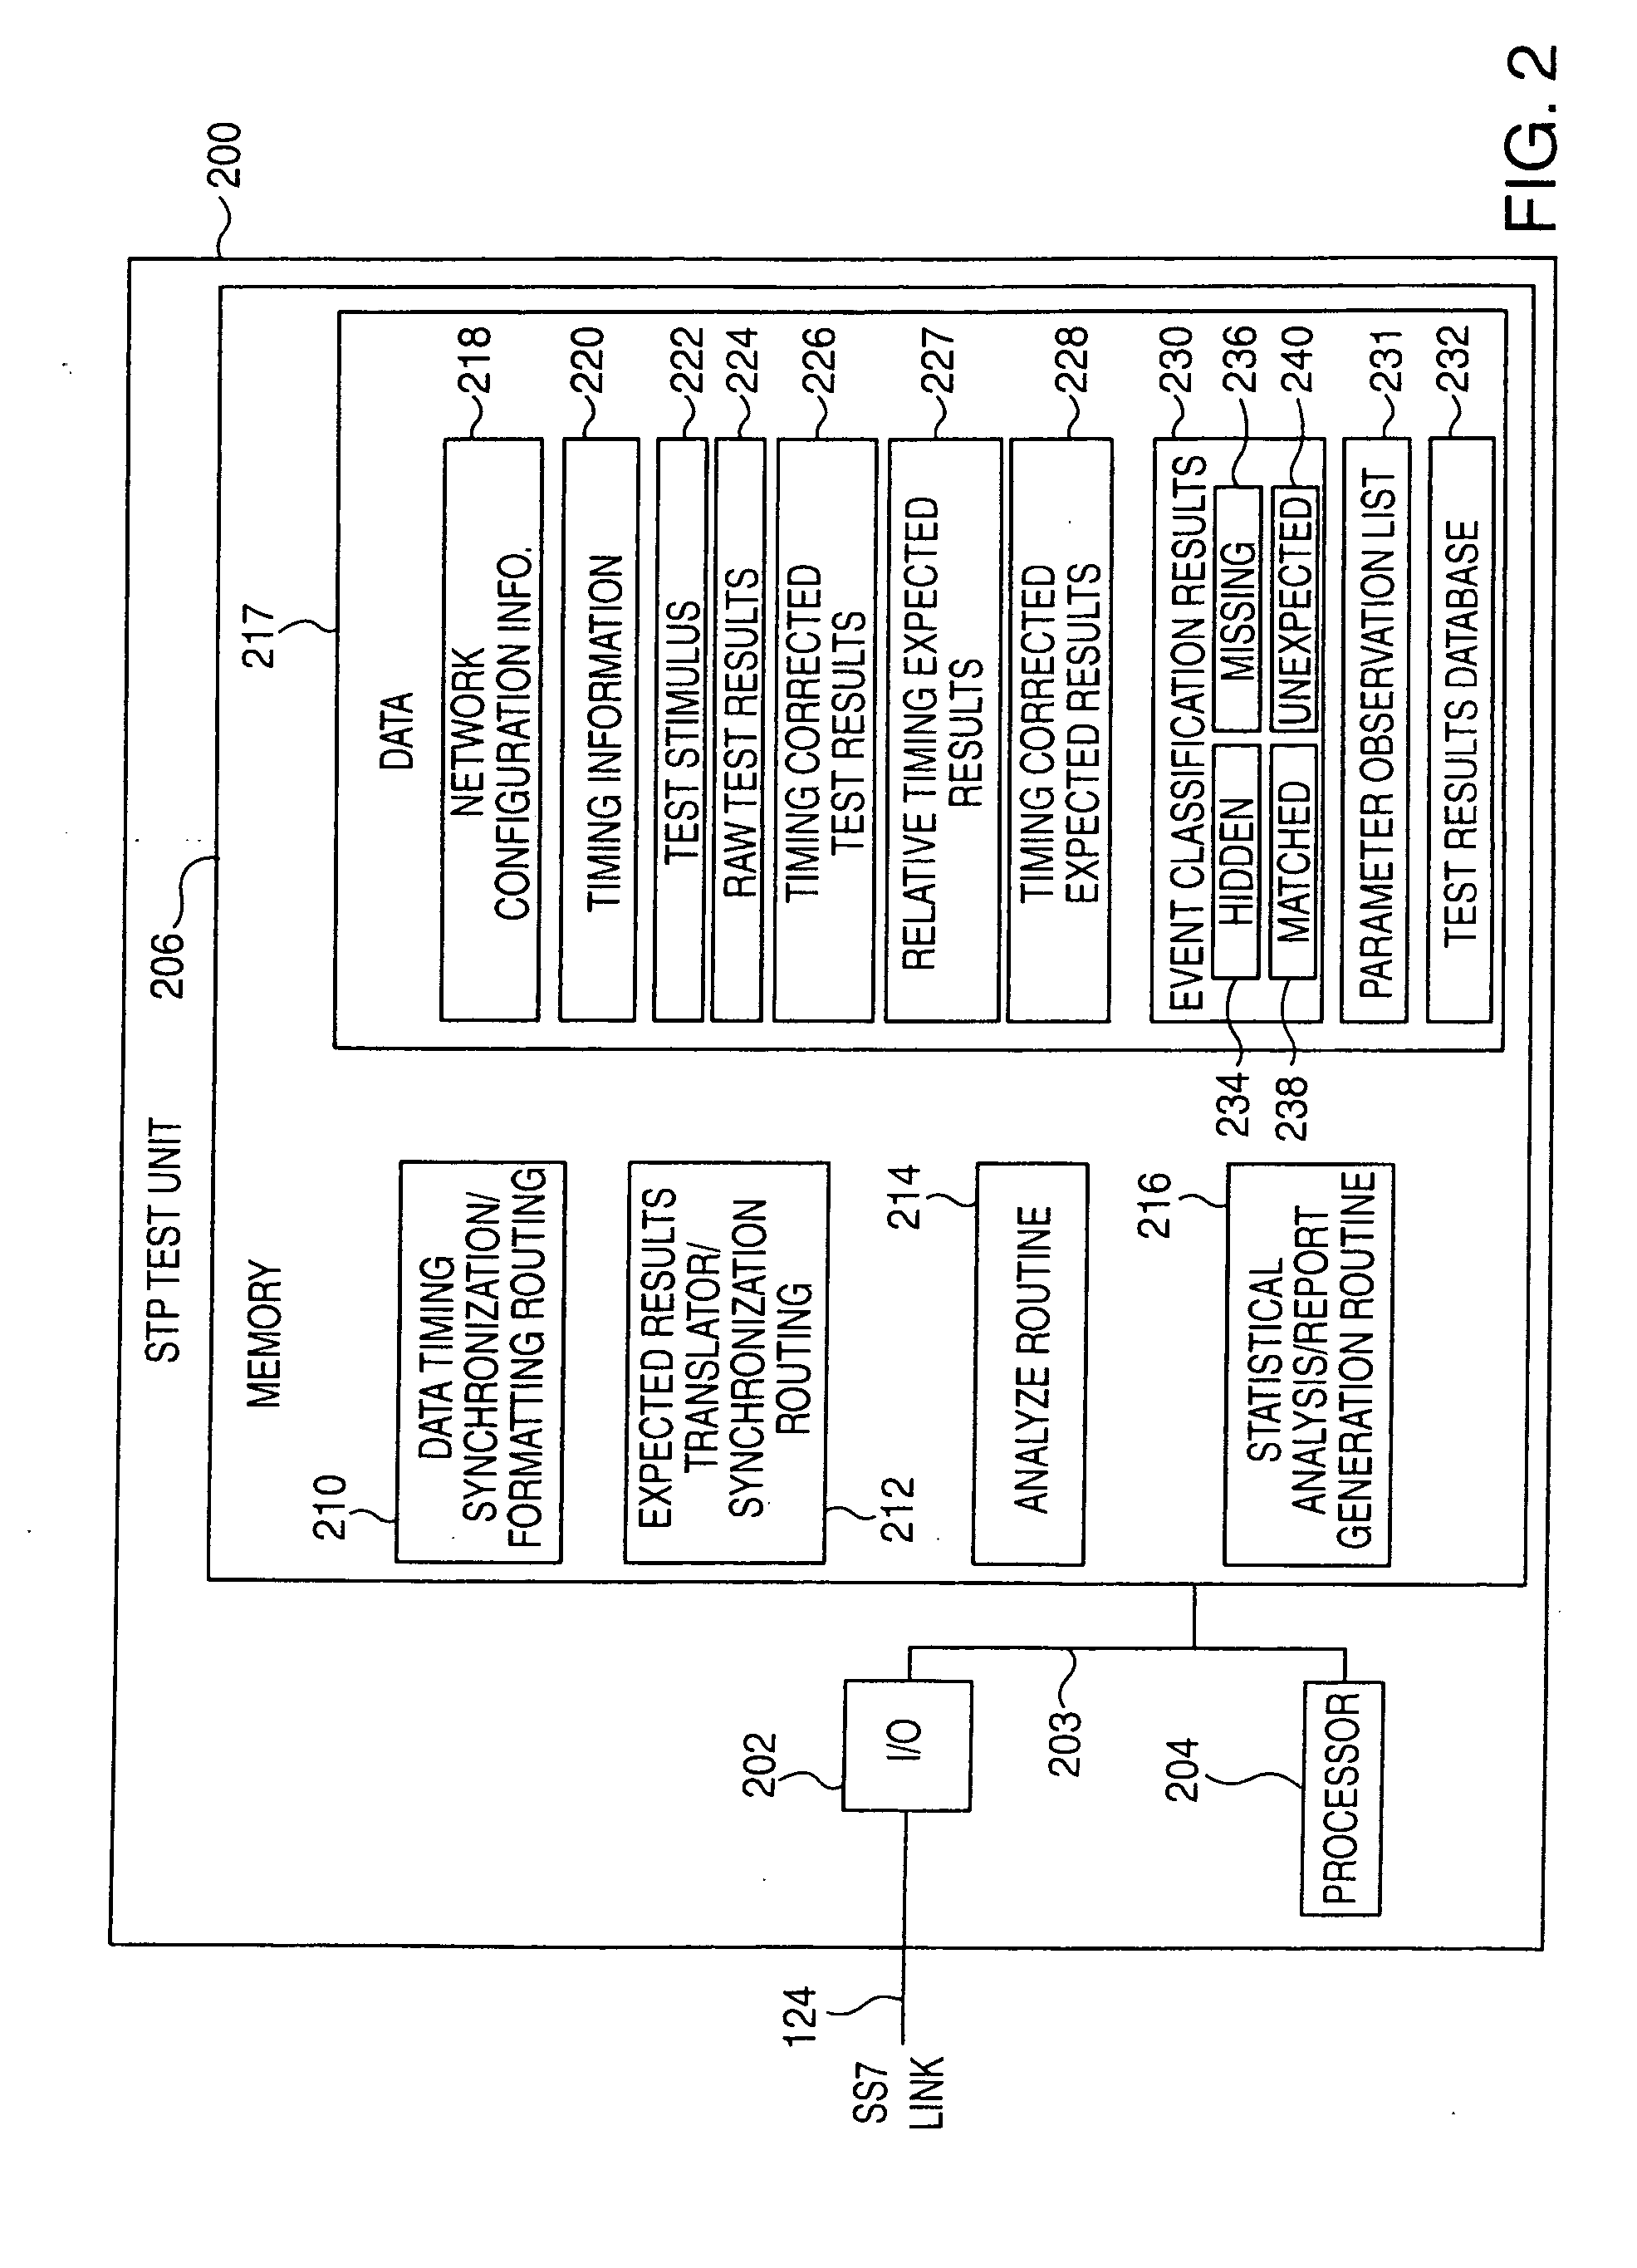 Methods and apparatus for automating testing of signalling transfer points